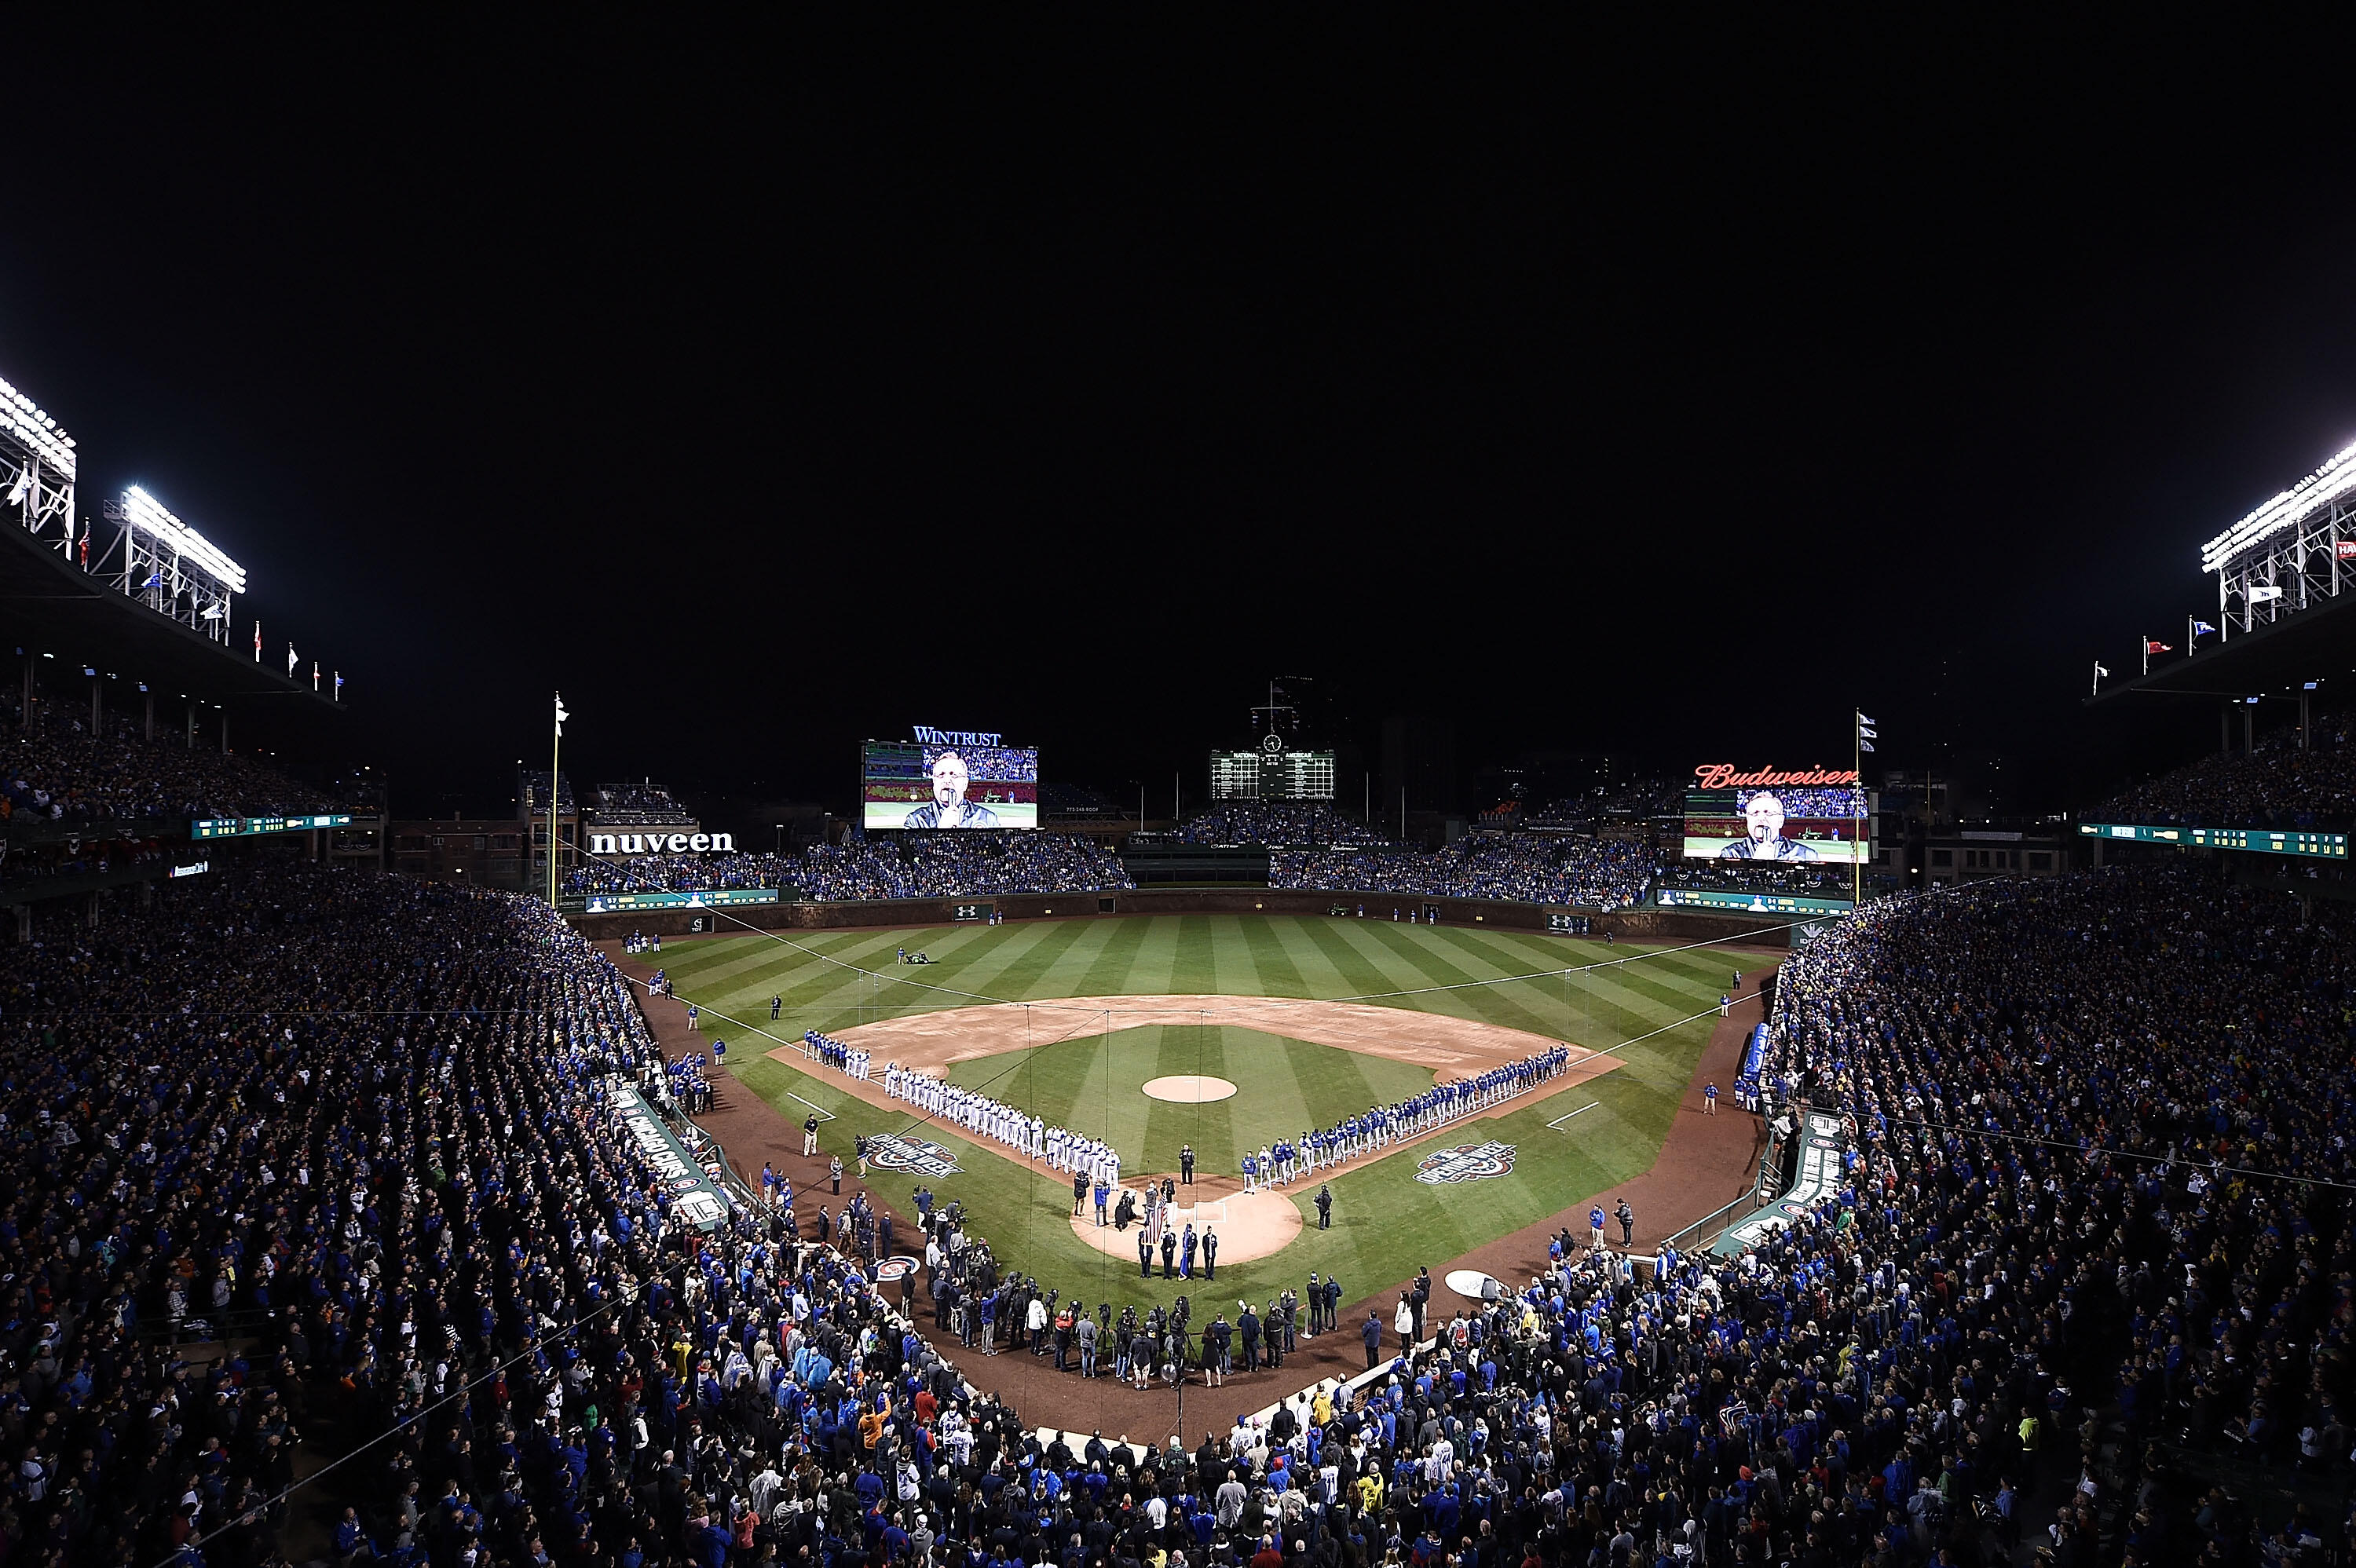 CHICAGO, IL - APRIL 10:  A general view of Wrigley Field prior to the home opener between the Chicago Cubs and the Los Angeles Dodgers on April 10, 2017 in Chicago, Illinois.  (Photo by Stacy Revere/Getty Images)